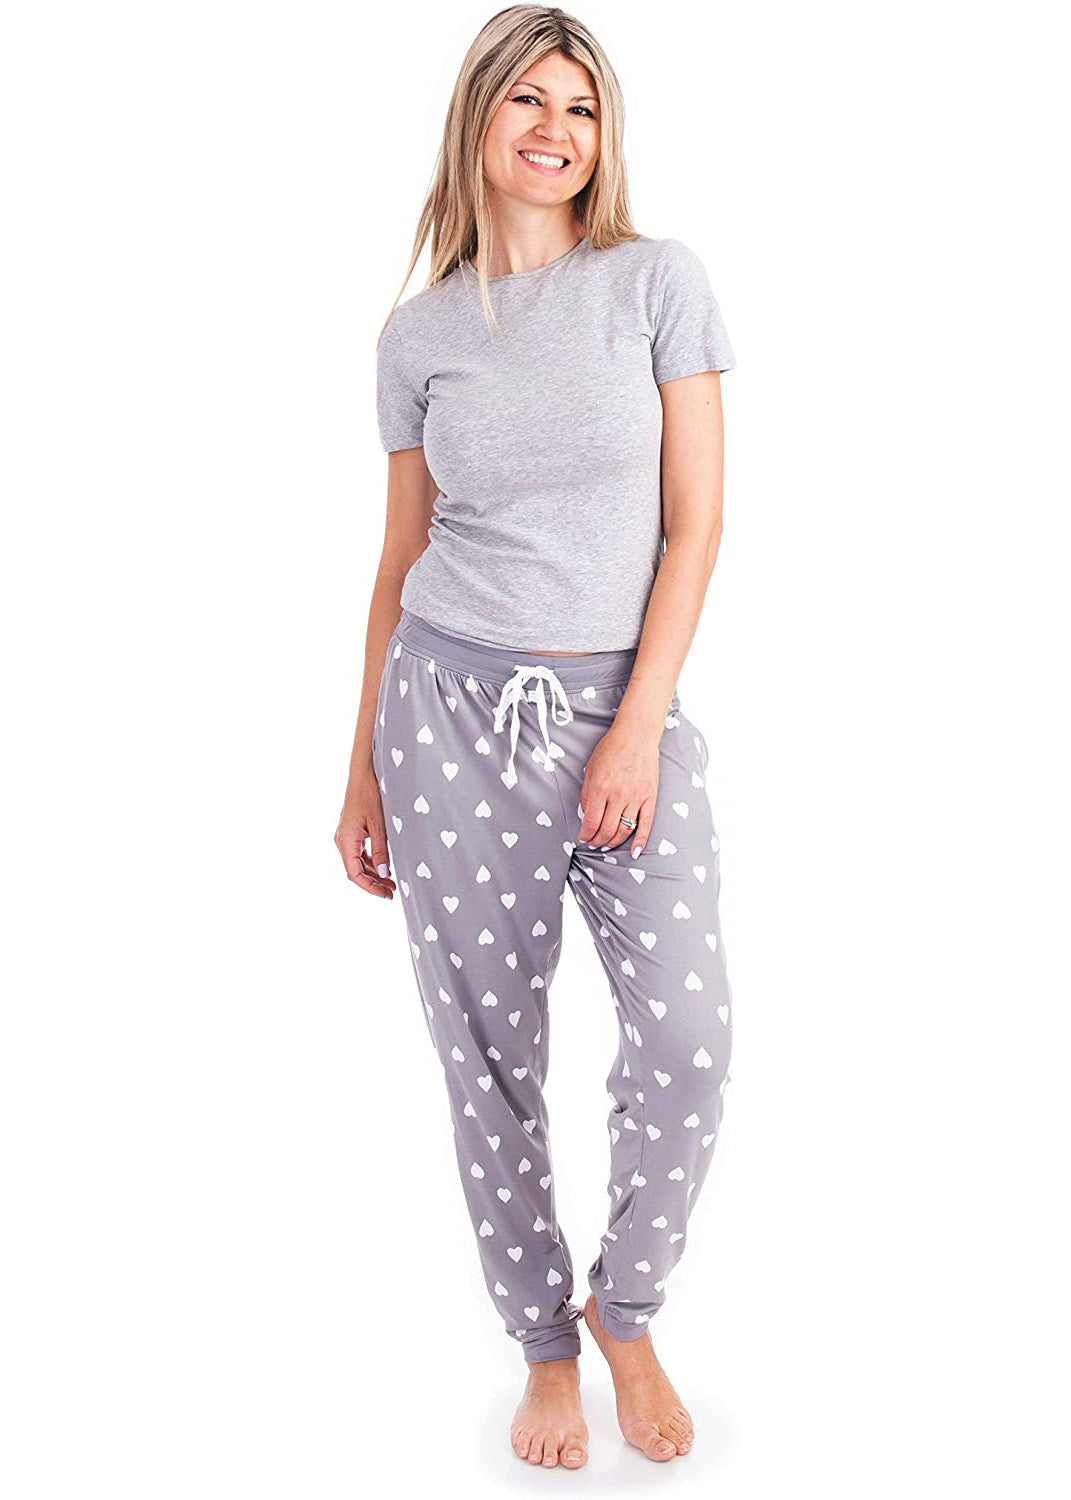 
                  
                    PJ joggers with soft velvety texture, stretch, elastic waistband, drawstring, and stylish ankle cuff. This pattern is white hearts on a grey background. The cuffs and the waist are matching grey.
                  
                